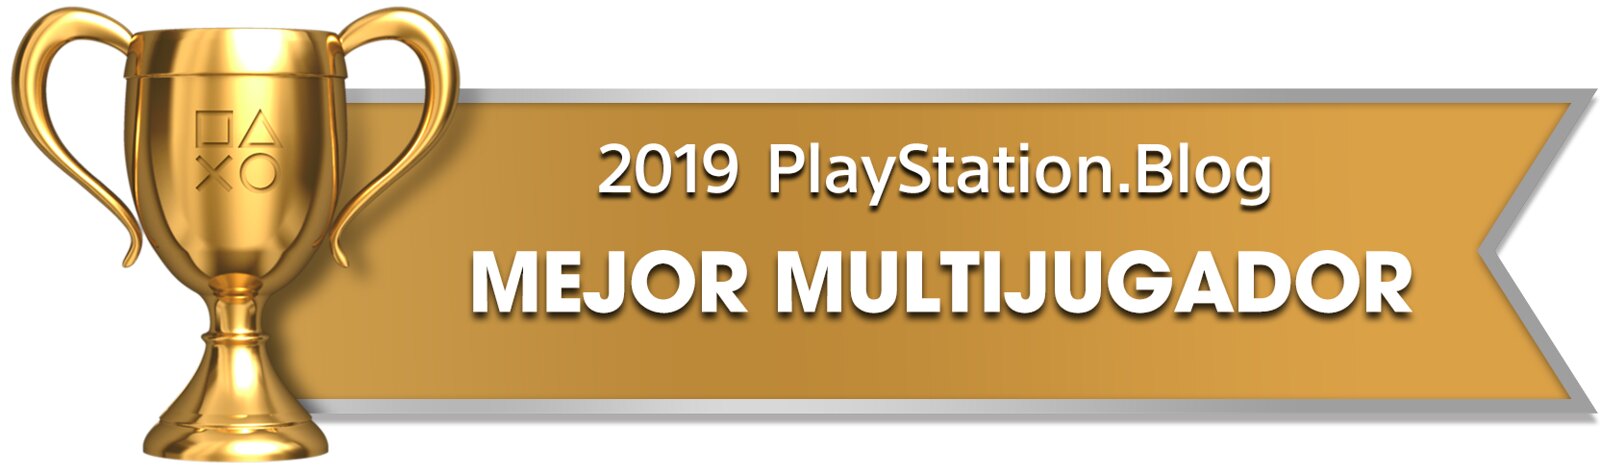 PS Blog Game of the Year 2019 - Best Multiplayer - 2 - Gold